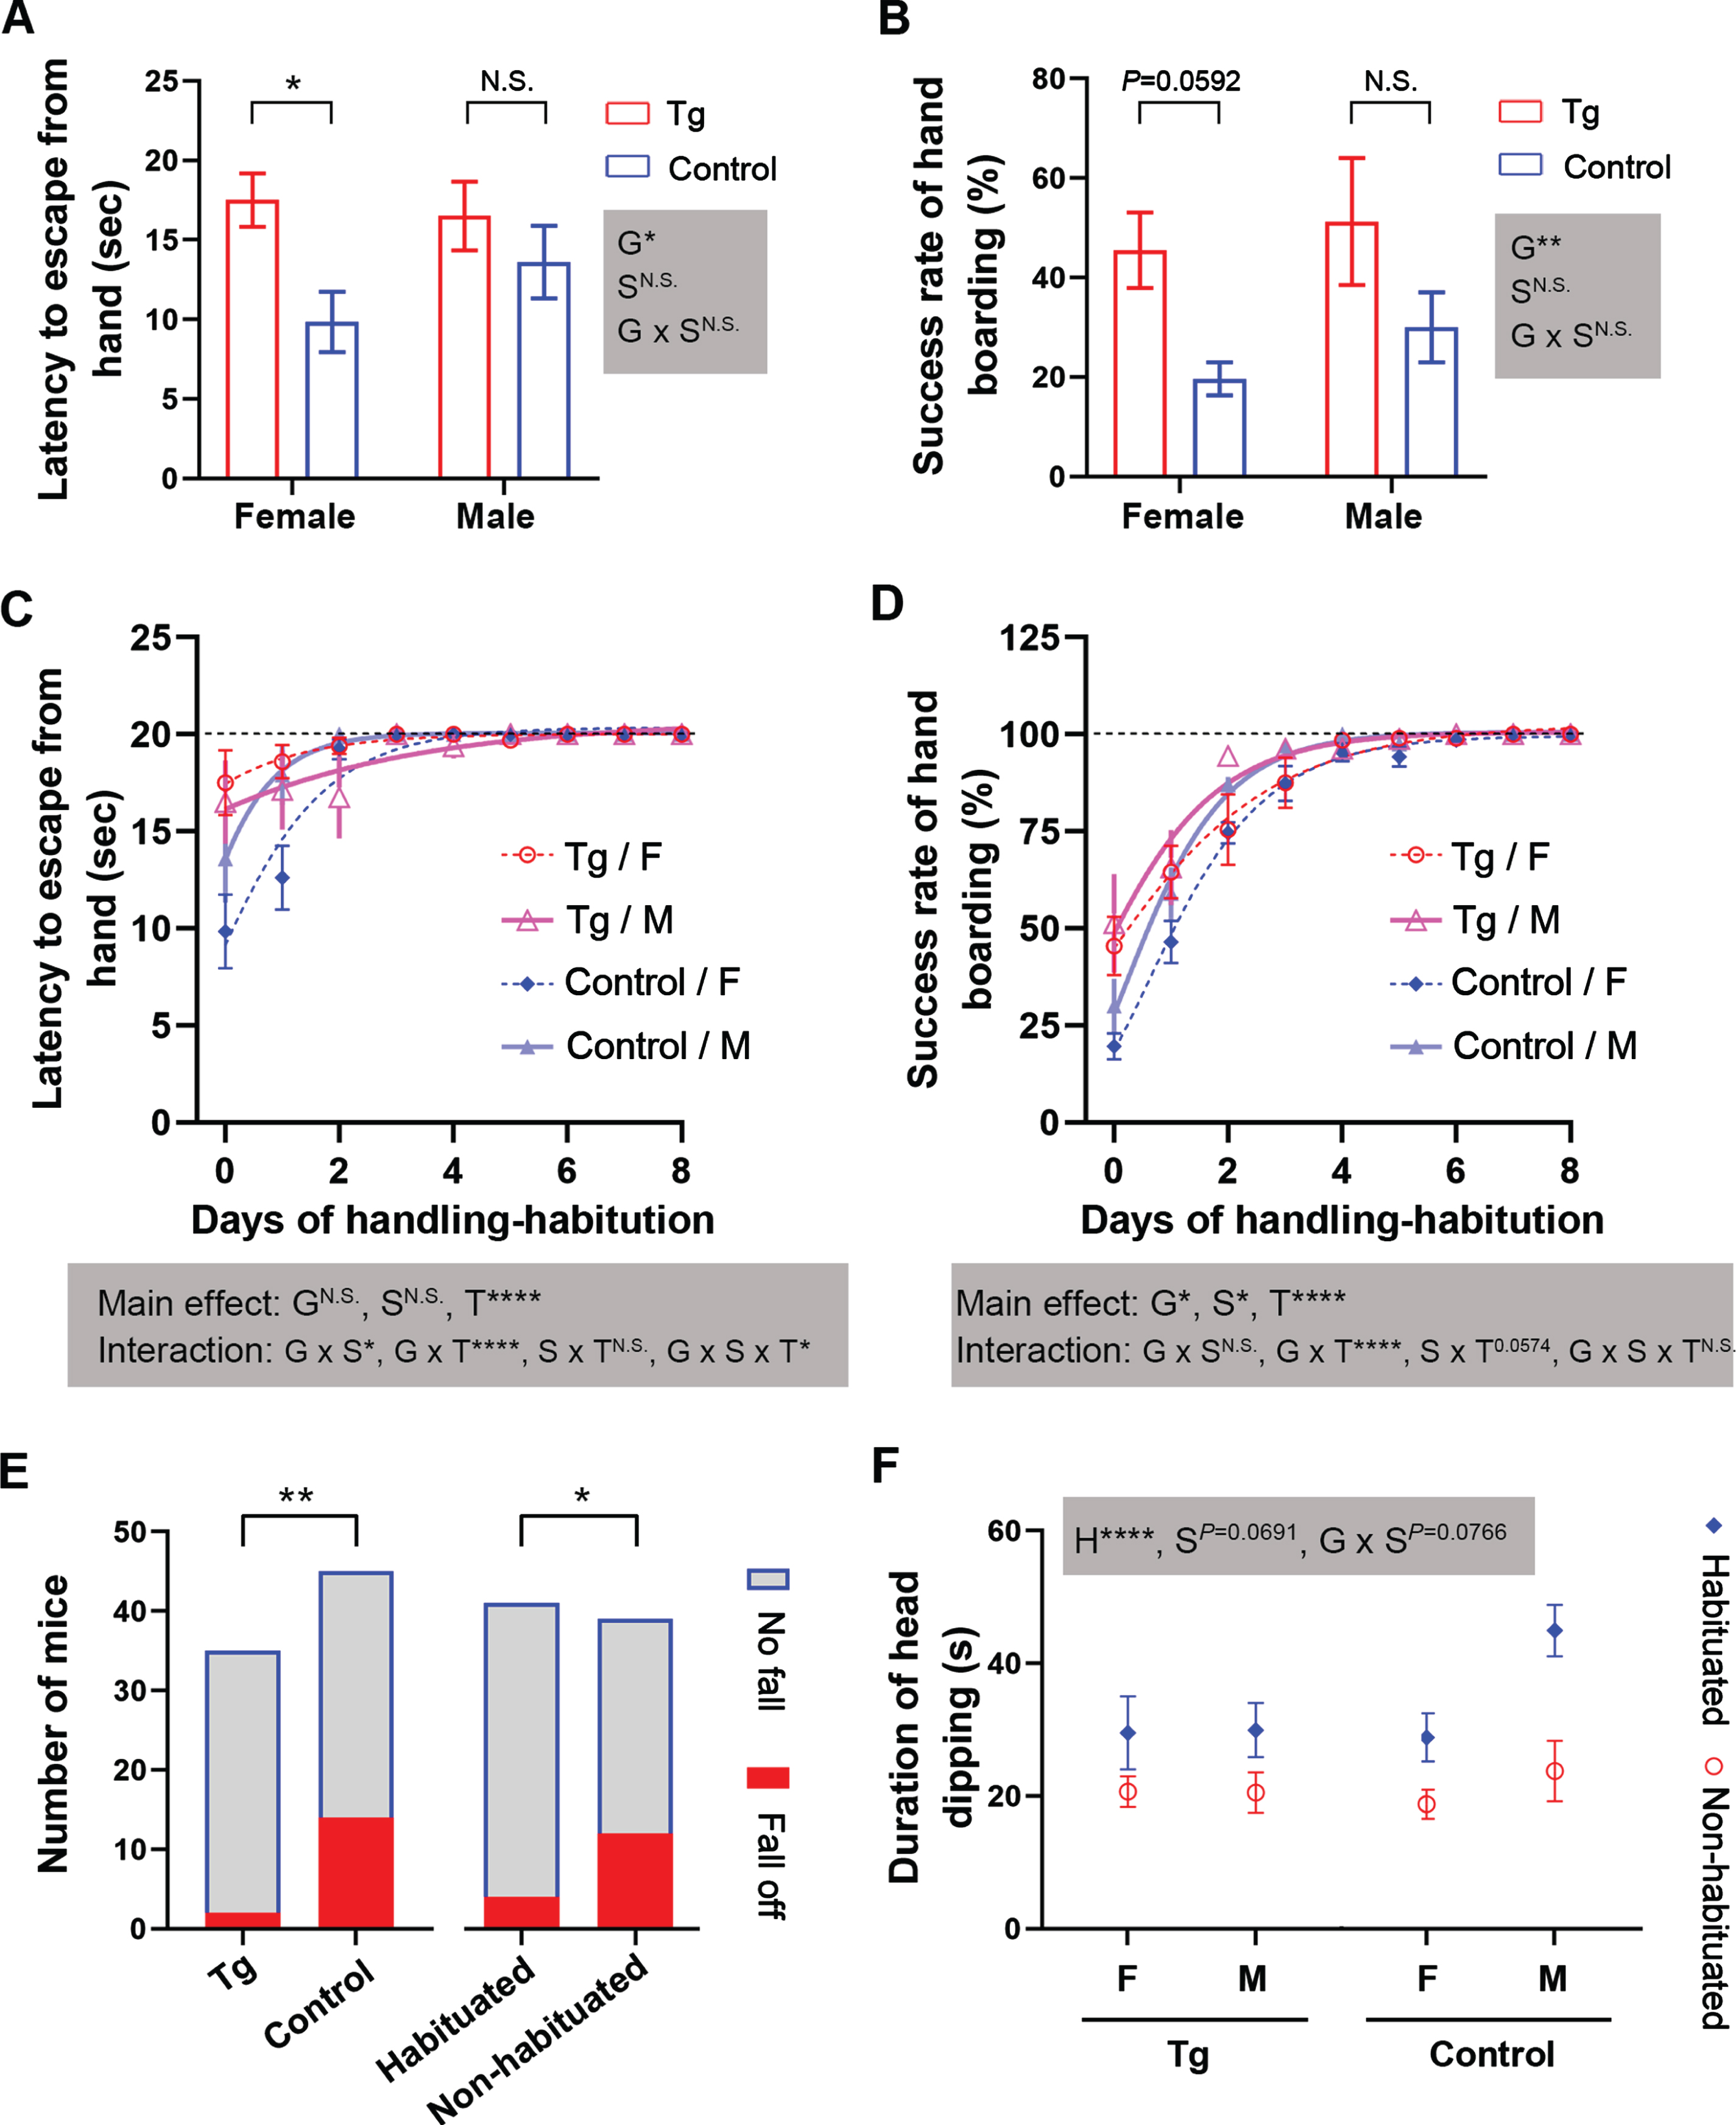 Middle-aged 3×Tg-AD mice are tamer than age-matched control mice and prior handling-habituation markedly enhances the performance of these mice in the elevated plus maze task. Mice of each sex for each genotype, at the age of 11.5 months, were randomized into handling-habituated and non-habituated groups. A, B) Baseline assays of hand-staying and hand-boarding, respectively. C, D) Curve fits of the progress of handling-habituation with the Gompertz growth model. E) Stacked bars showing reduced incidence of falling off the elevated plus maze in handling-habituated mice and in 3×Tg-AD mice. F) Interleaved symbols showing increased duration of head dipping into the open arms. Data are expressed as mean±SEM and analyzed with two-way (A, B), repeated-measures three-way (C, D), or three-way (F) ANOVA. n = 8–13 mice/condition in (A-F); n = 5–11 mice/condition in (F) due to exclusion of mice that fell off the maze. Data in (E) is analyzed with Fisher’s exact test. *p < 0.05, **p < 0.01, ****p < 0.0001. The shaded boxes show corresponding ANOVA results, including main effects and interactions. The exact p values are shown when they are closed to 0.05. F, female; G, genotype; H, habituation; M, male; N.S., non-significant; S, sex; T, time.